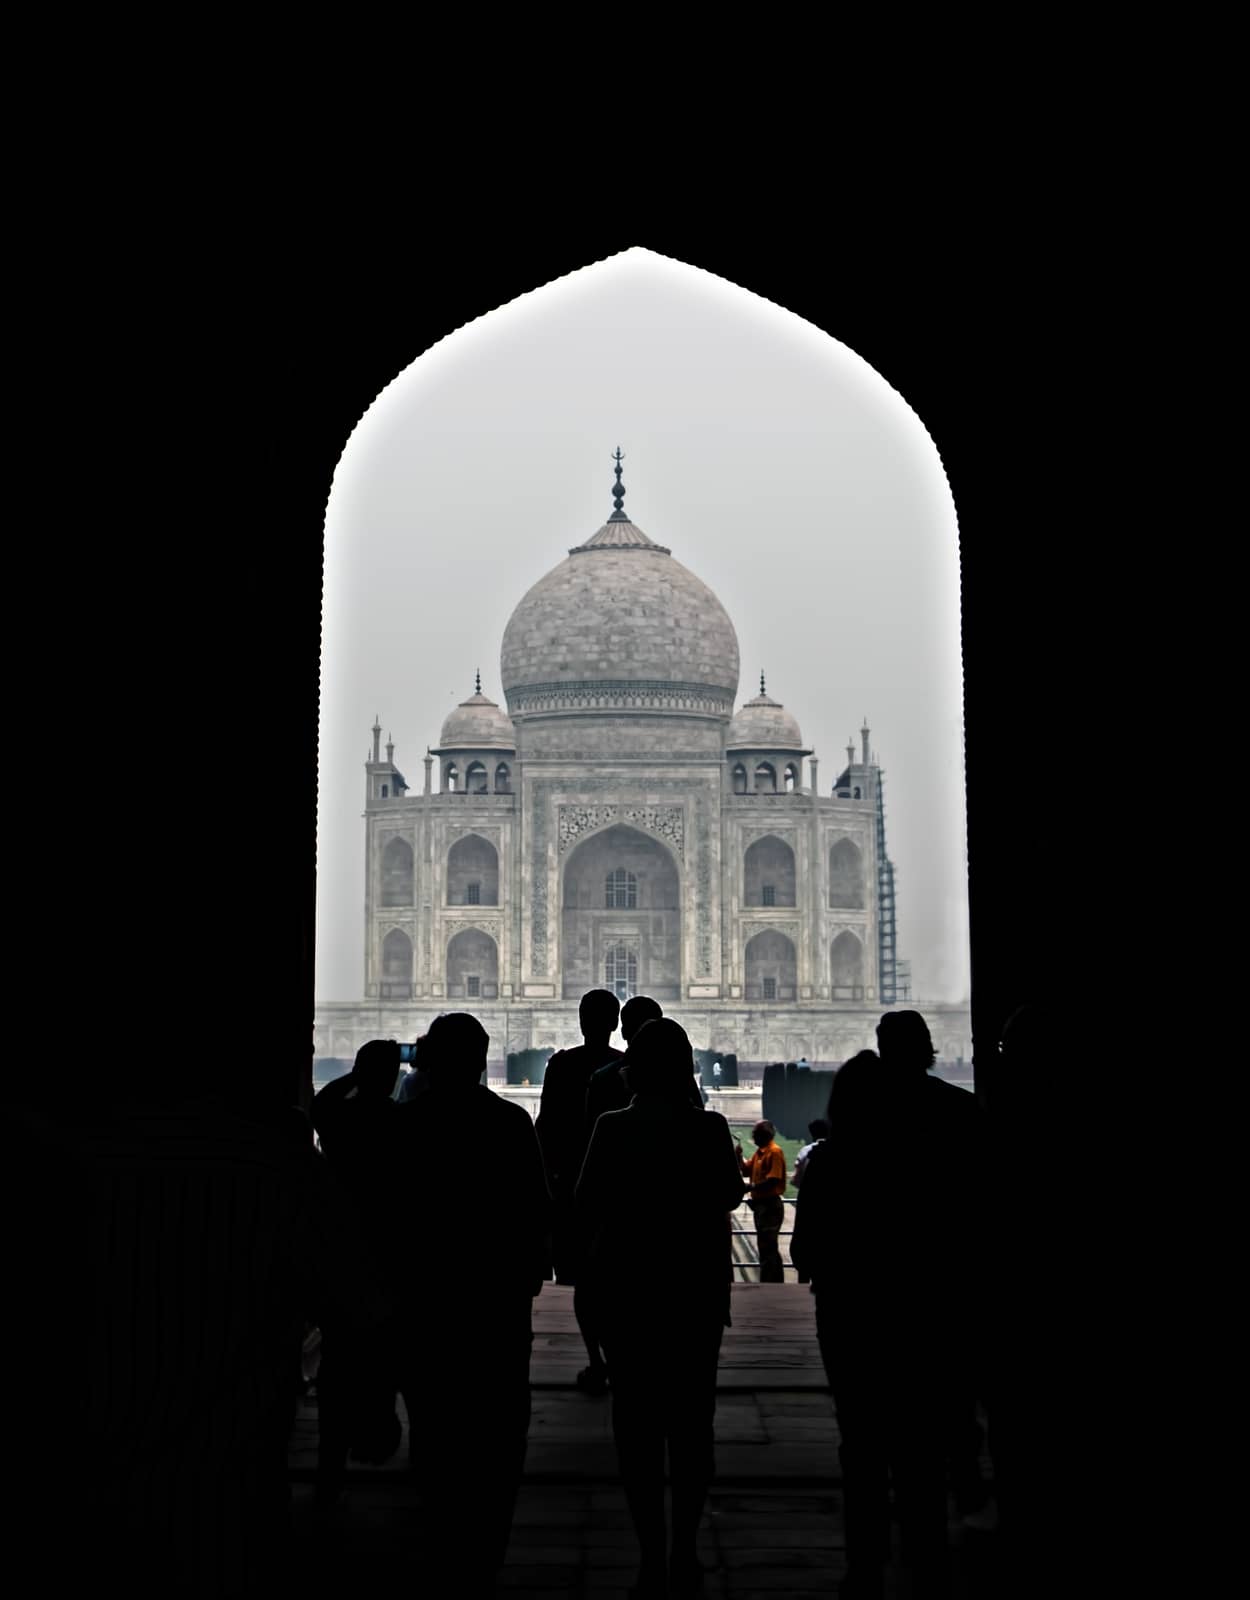 First glimpse of one of the seven wonders of the world-The Taj Mahal is through this gate.